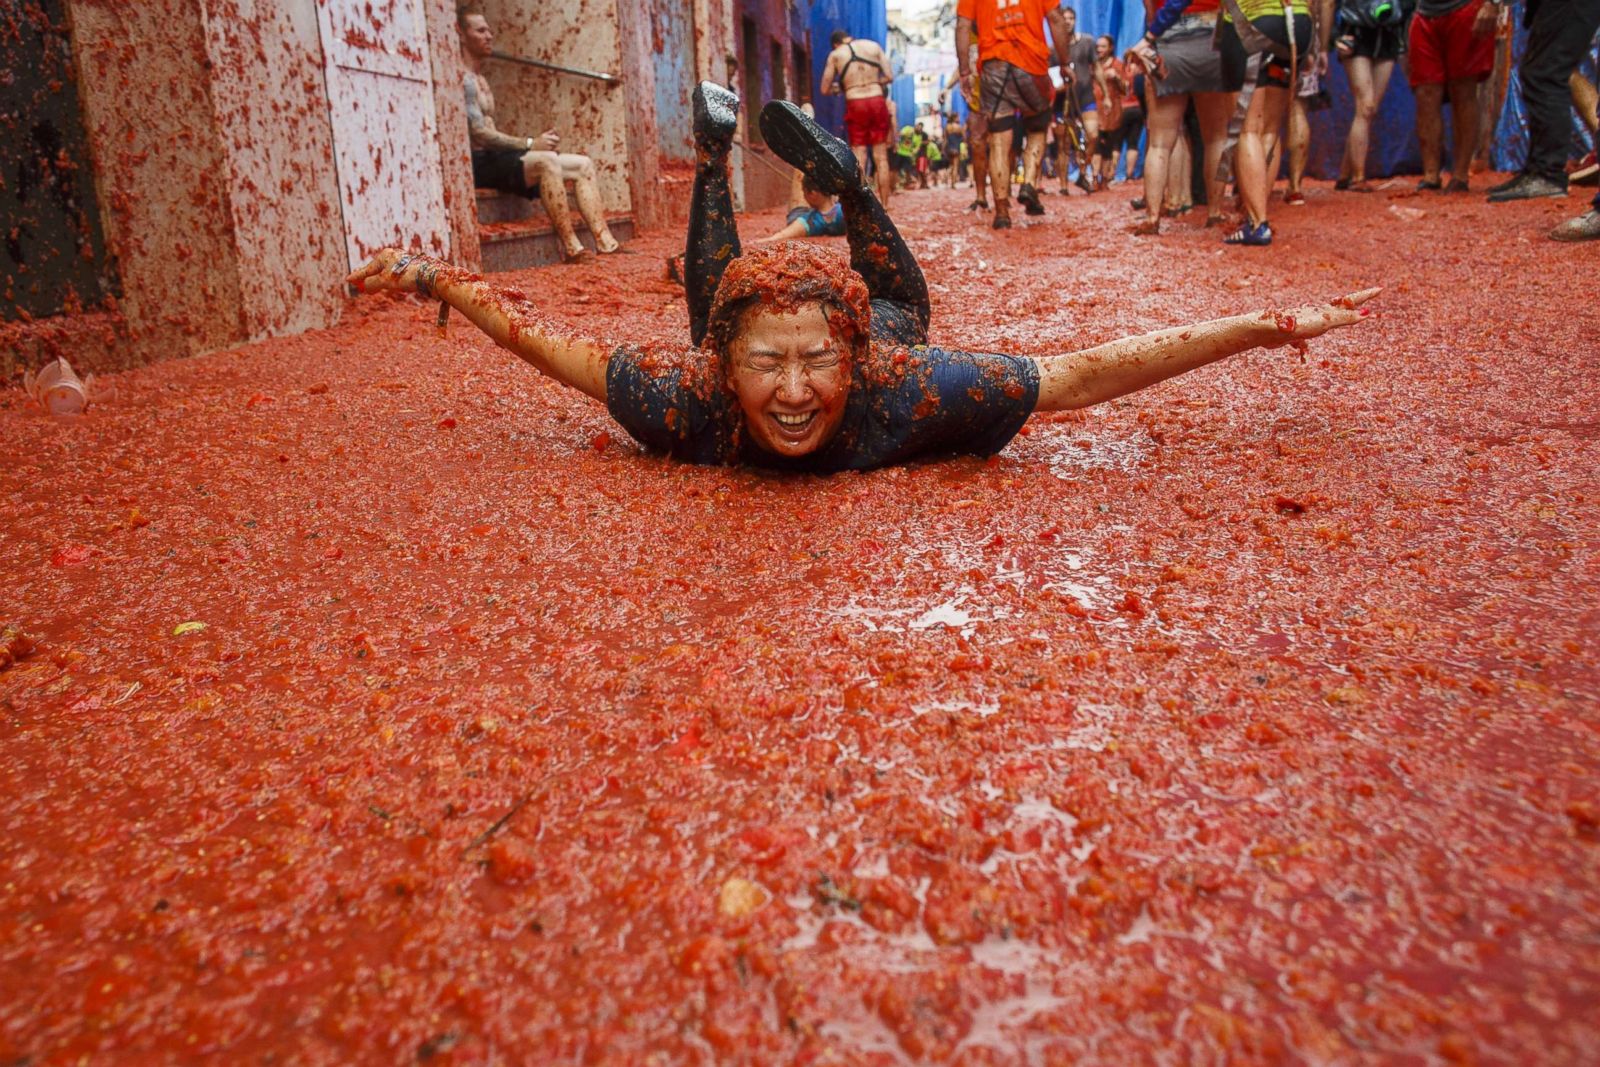 Away they go! Revelers wallow in pulp at Spain's Tomatina Festival